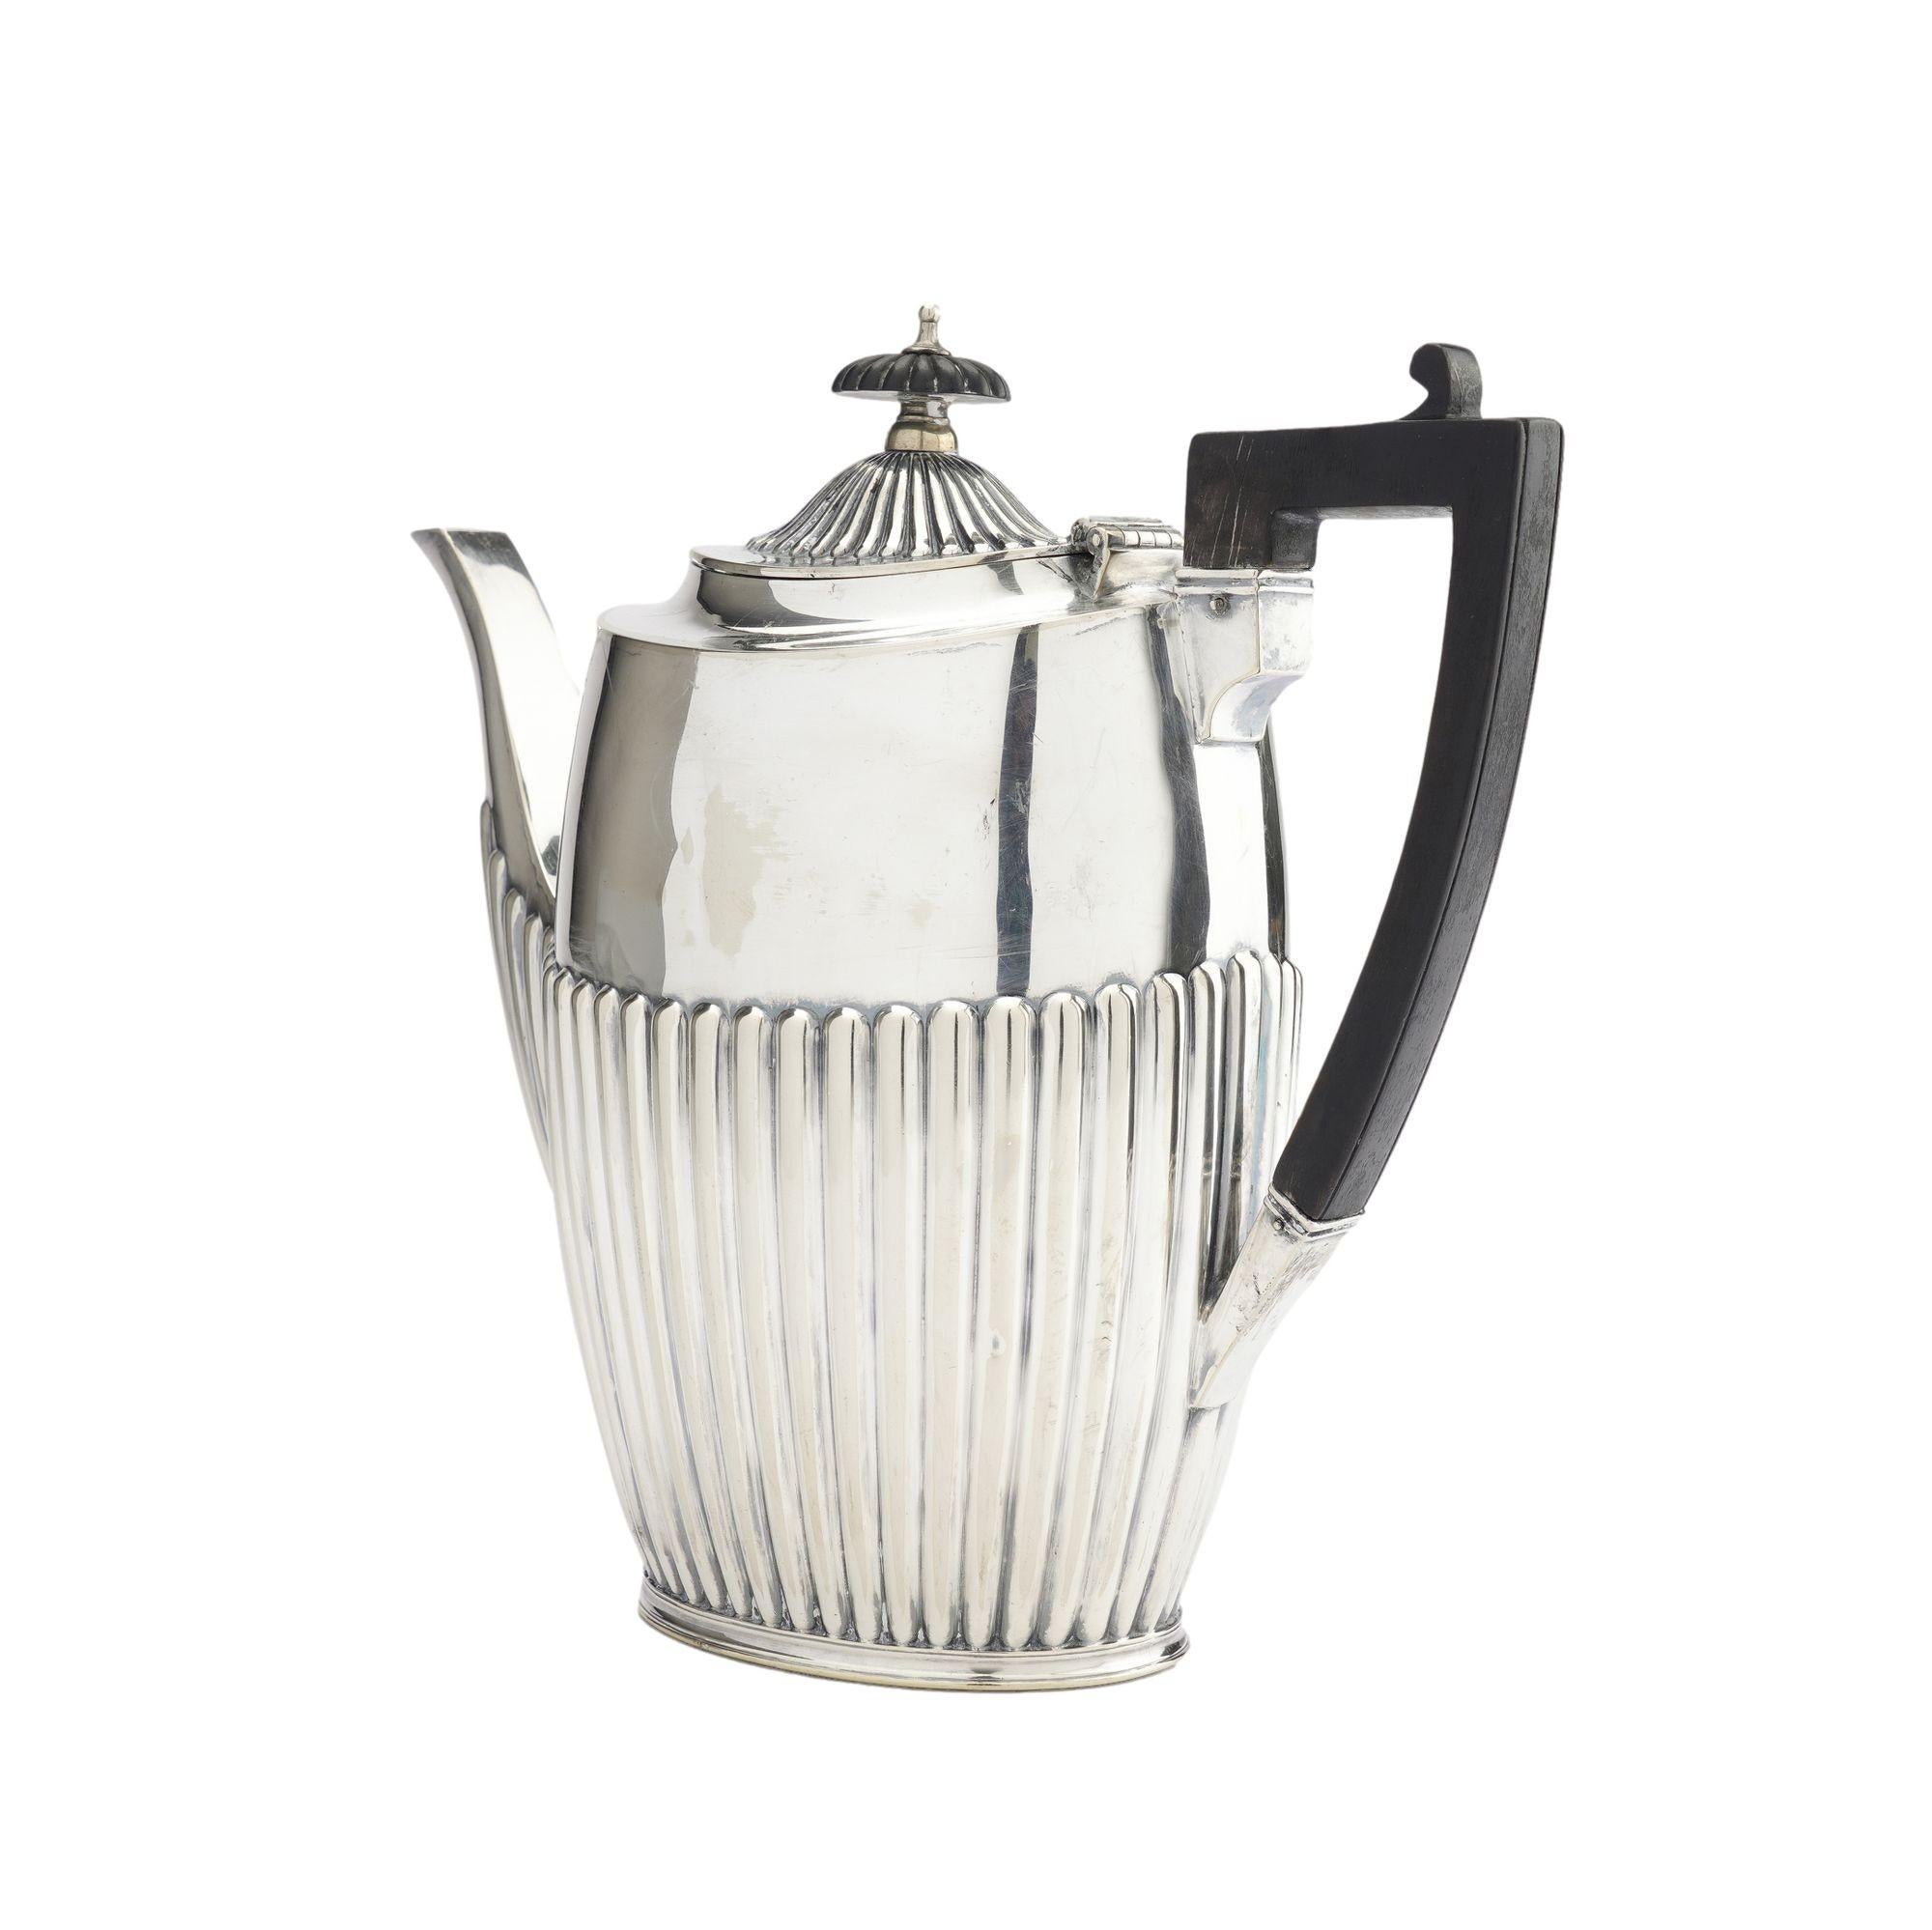 Edwardian Britannia plate coffee pot with a square carved ebonized wood handle in the Georgian taste. The pot has a reeded concave, oval hinged lid with a reel turned ebonized wood finial. The narrow bowed body has a reeded lower half including the